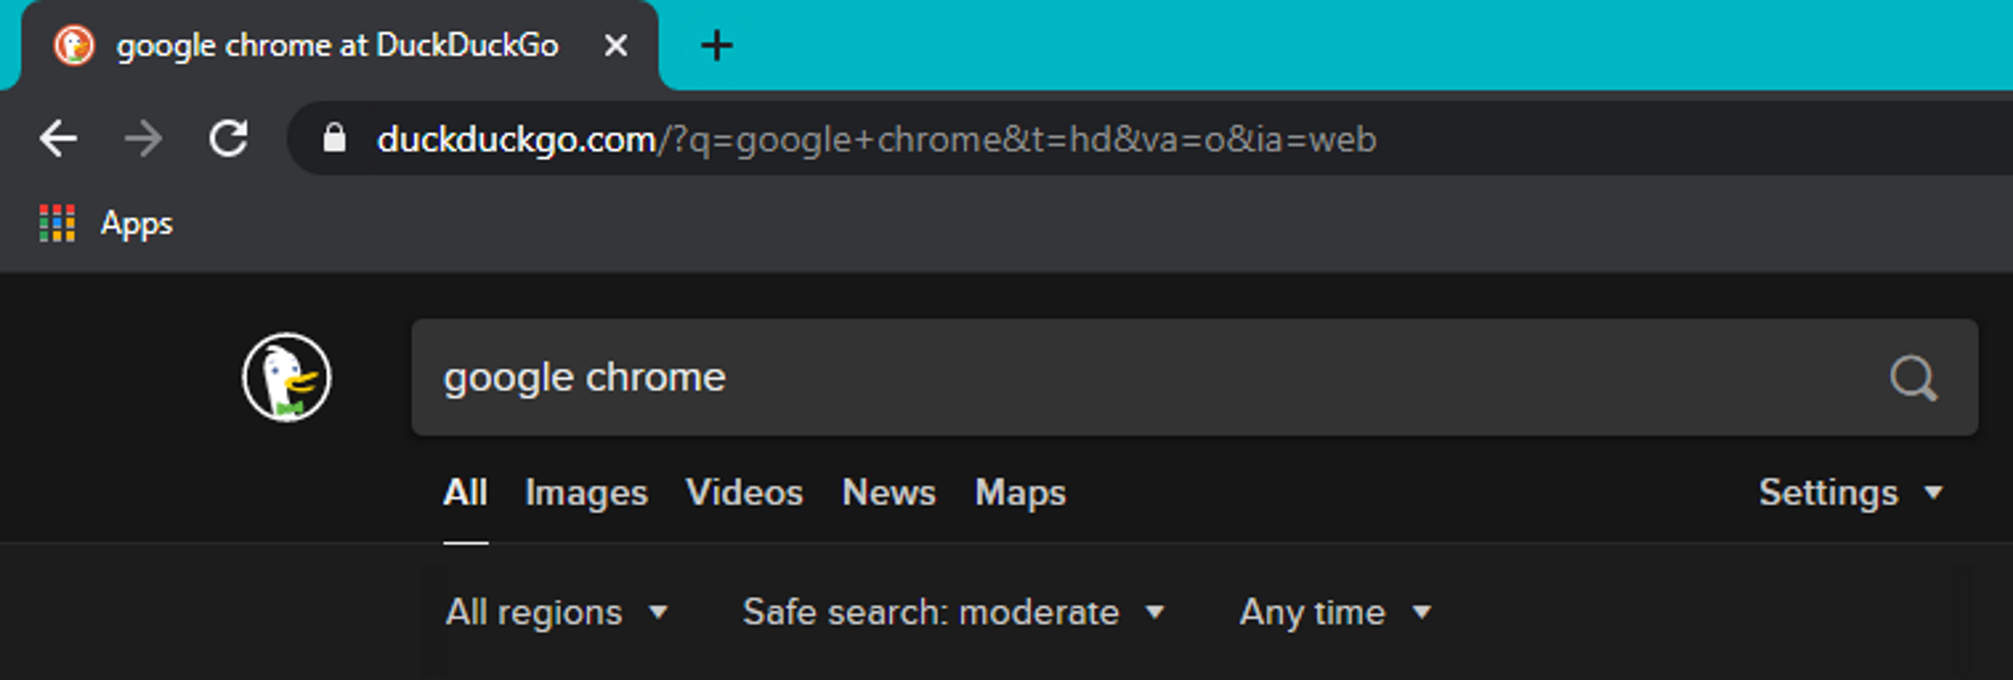 DuckDuckGo's search term displayed on Chrome's address bar.